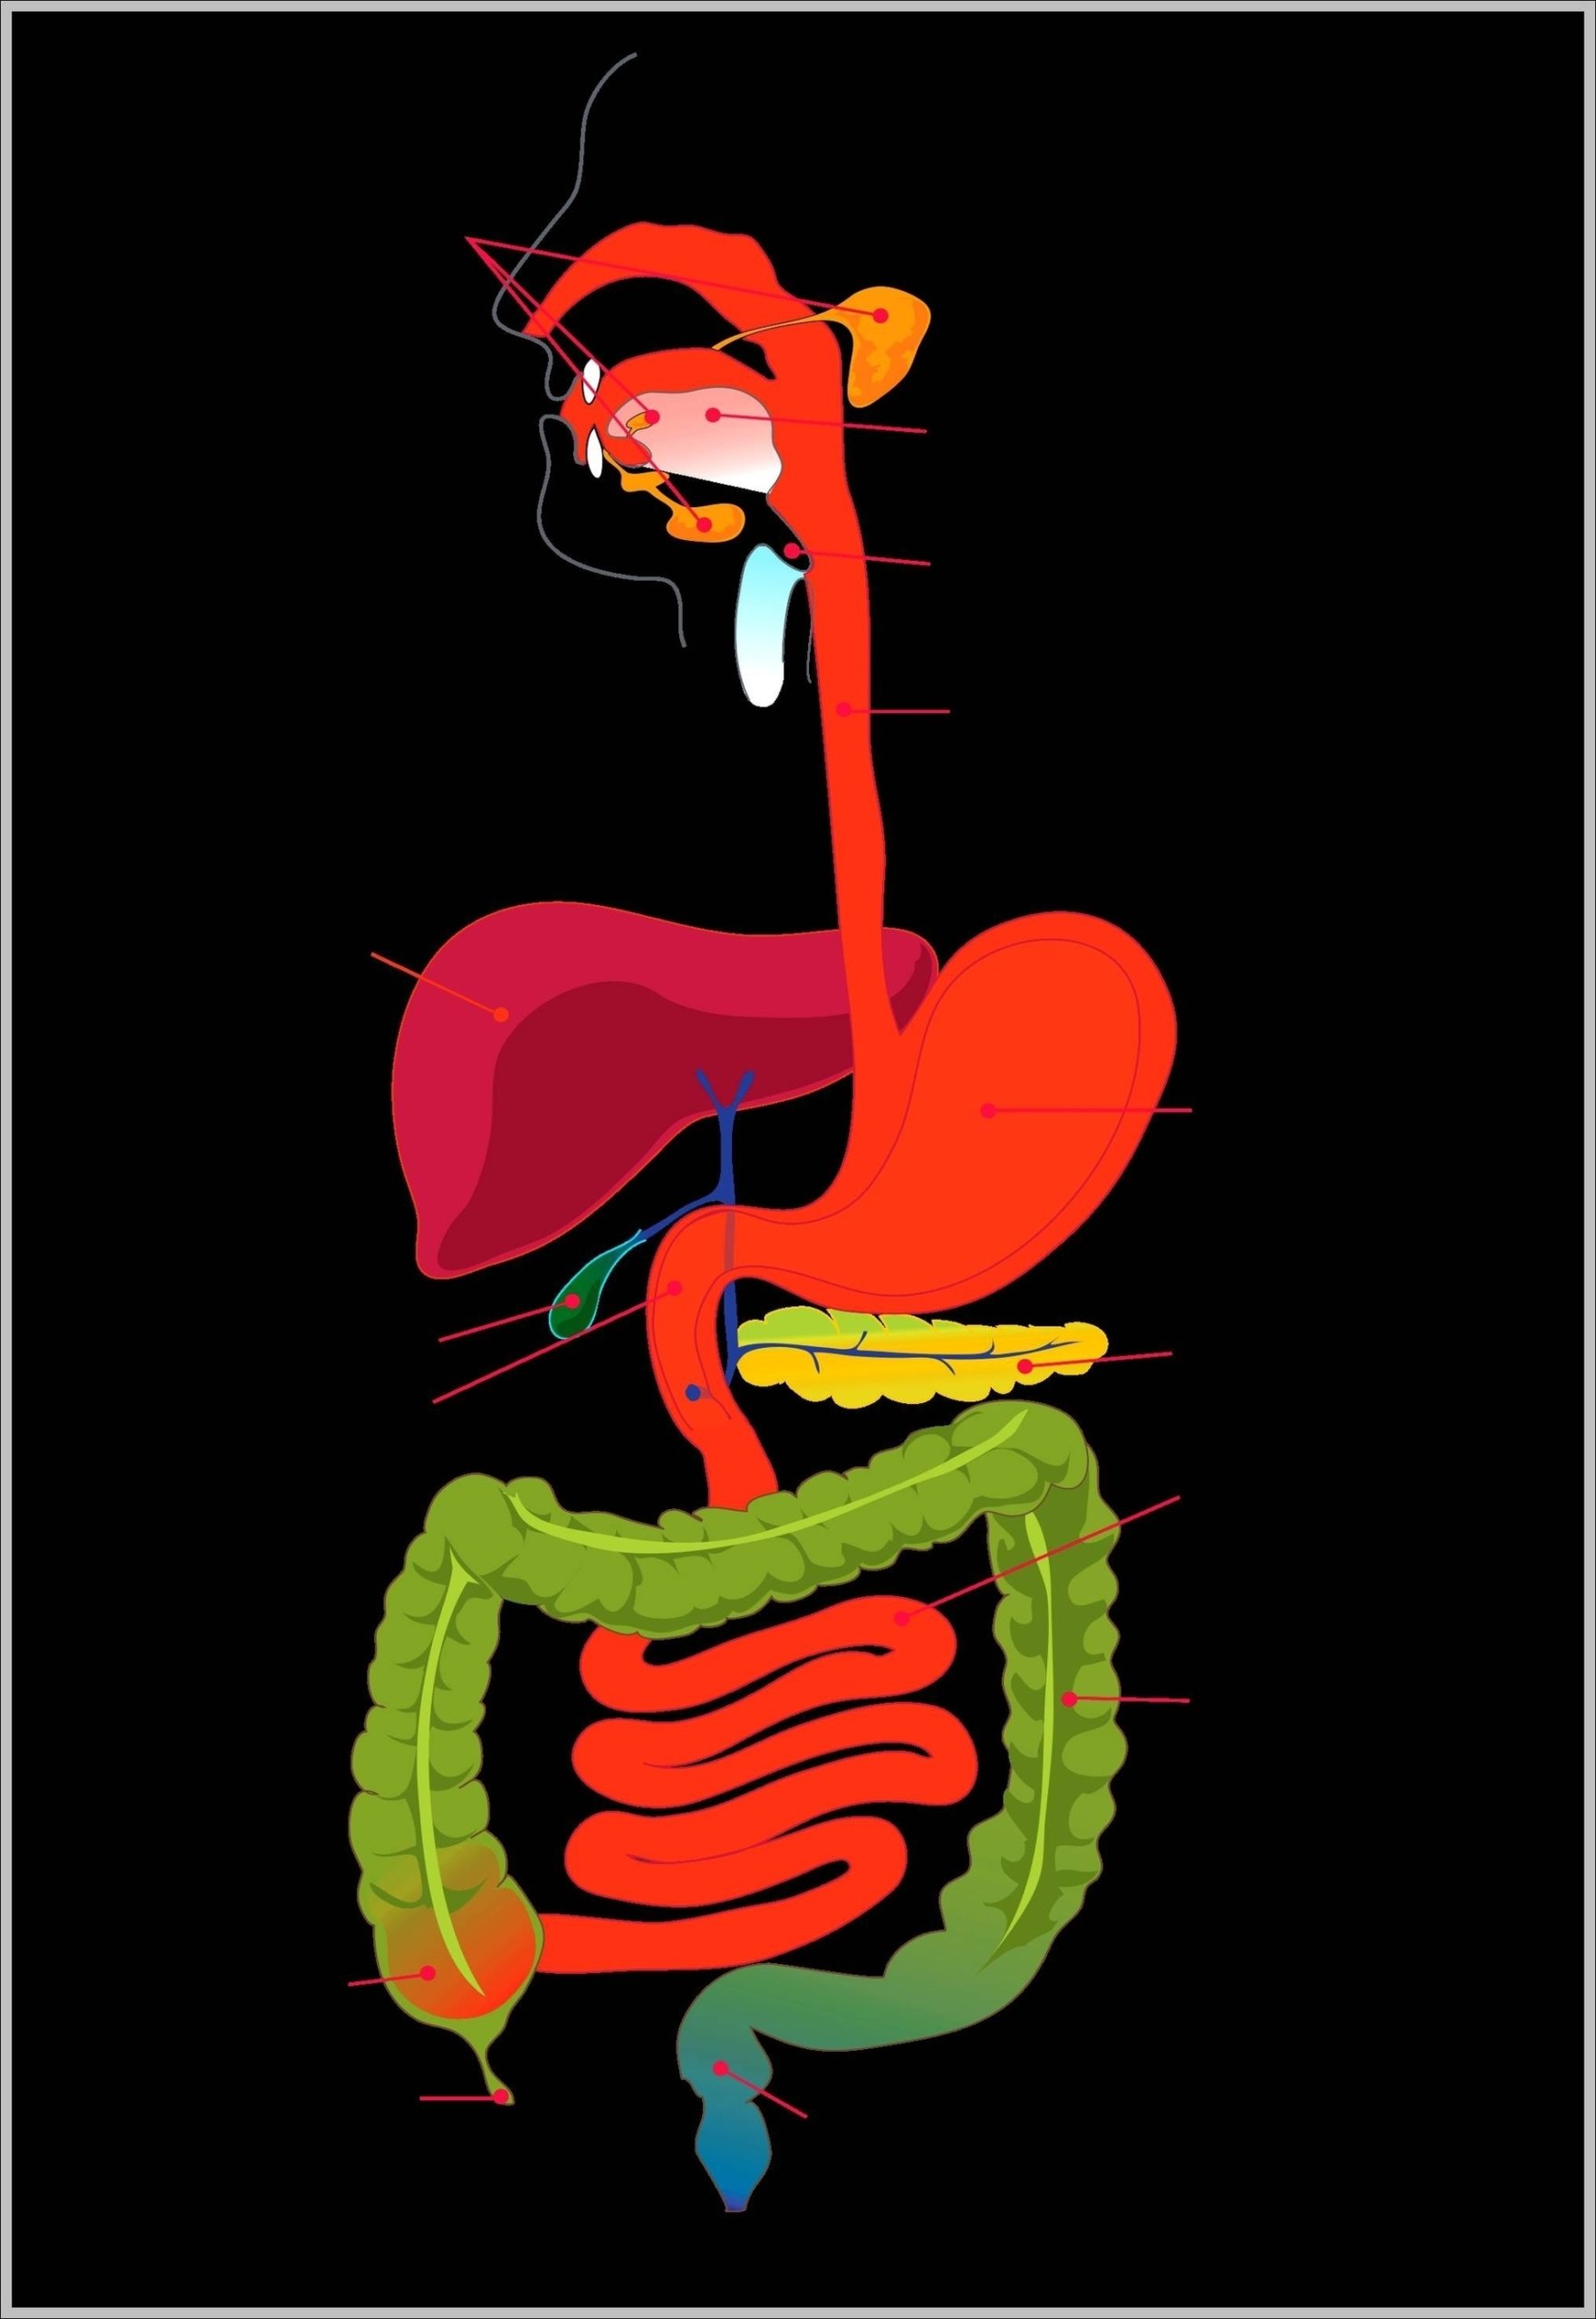 Pictures Of Digestive System For Kids Image scaled